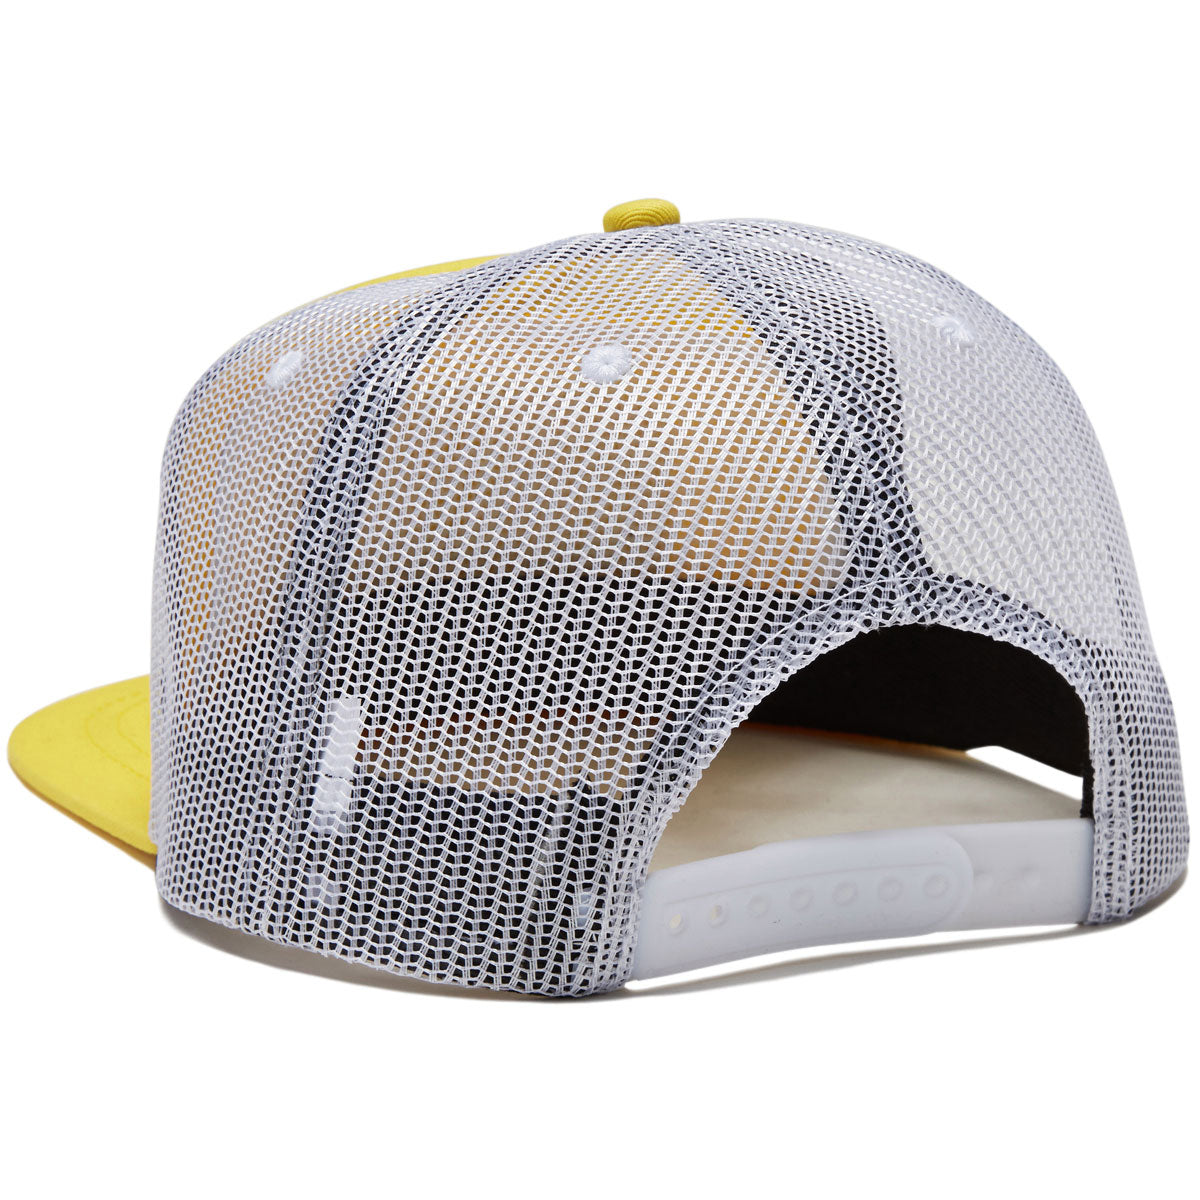 Snot Wide Boy Classic Trucker Hat - Yellow image 2